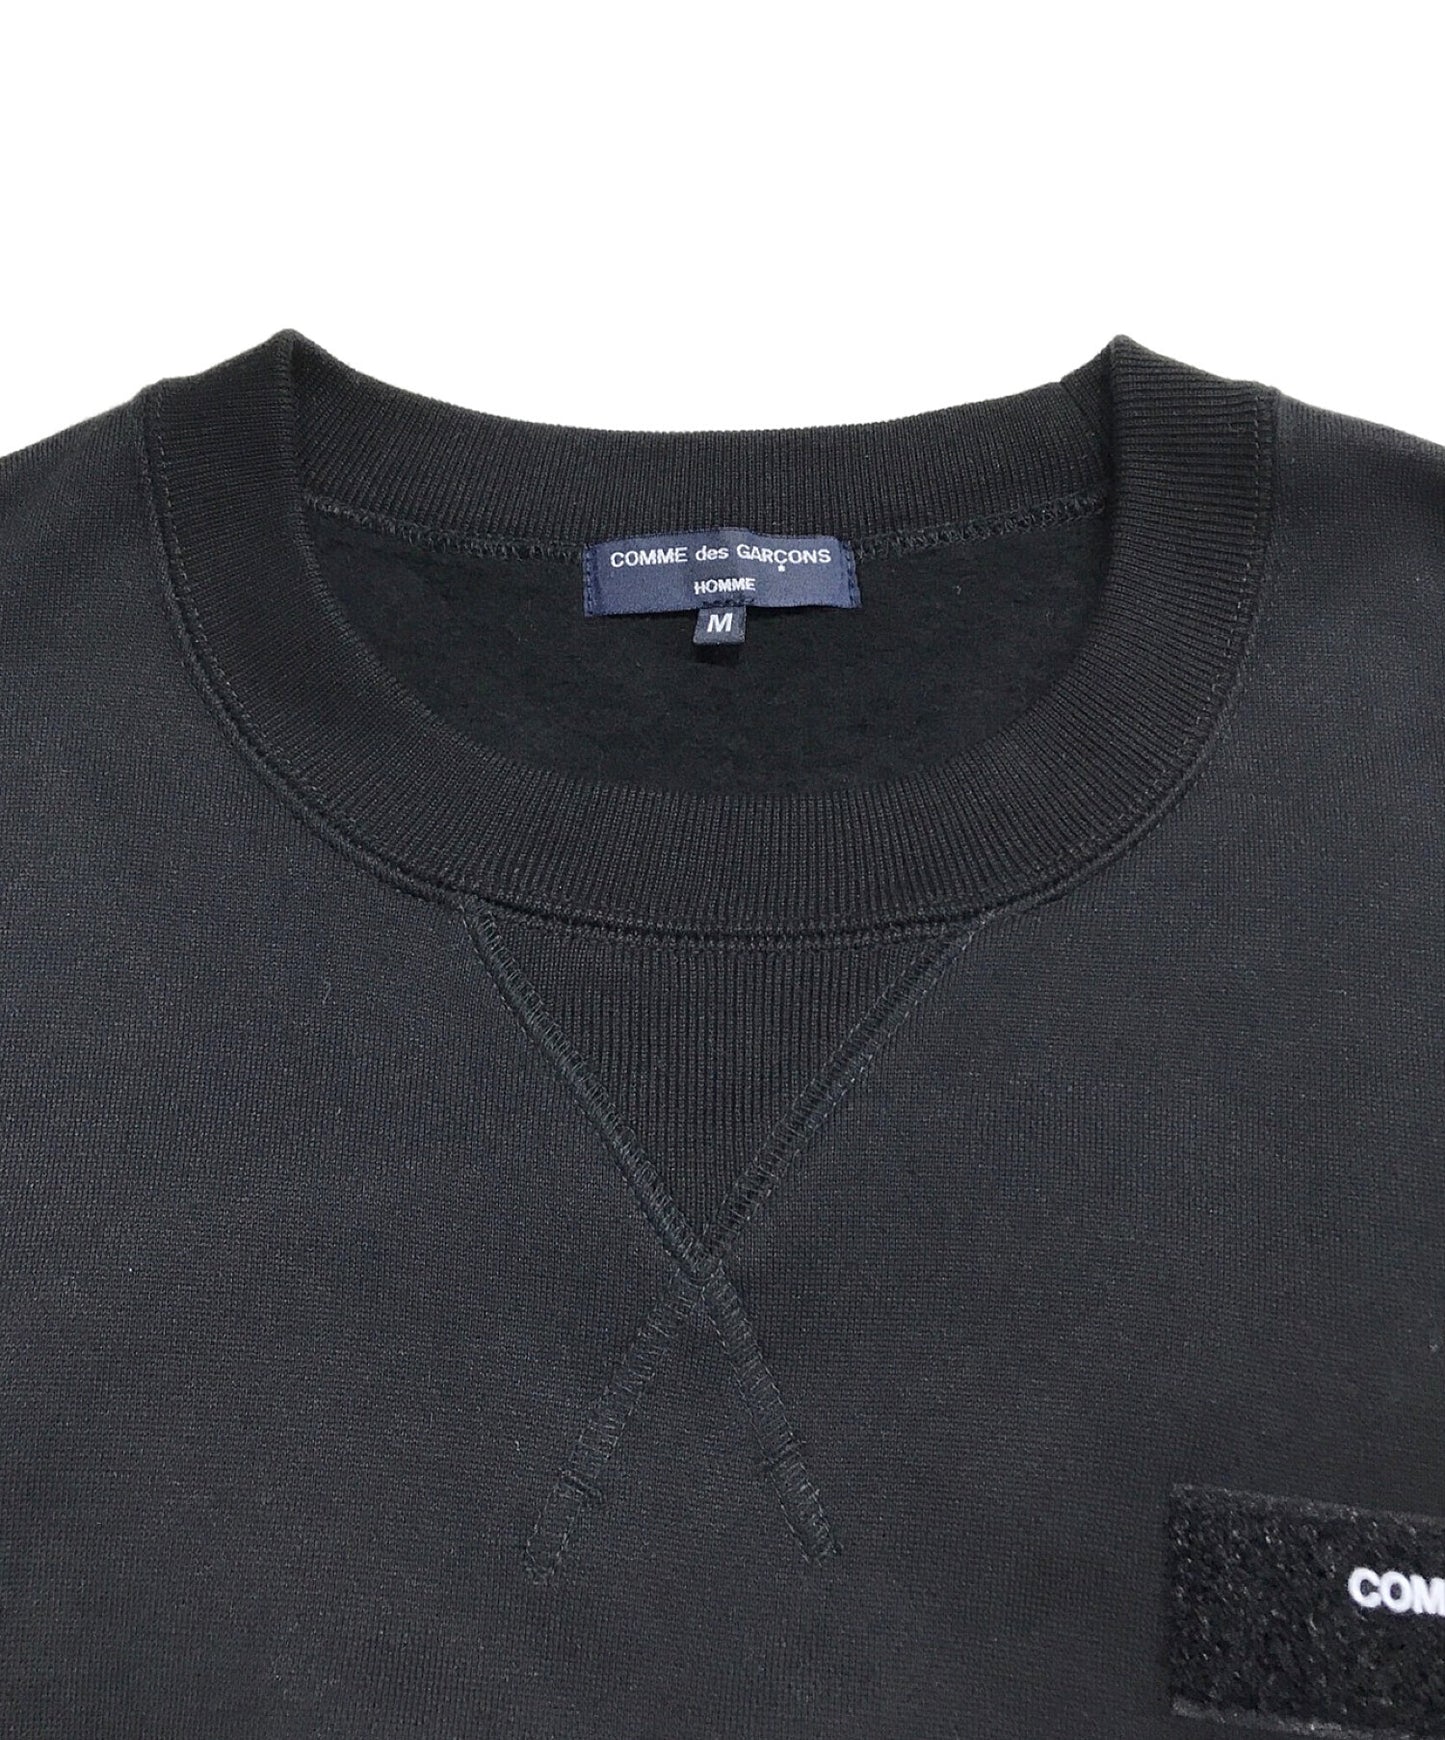 Comme des Garcons Homme Cotton-Backed Brushed Wool 및 Nylon Twill Sweatshirt HJ-T016